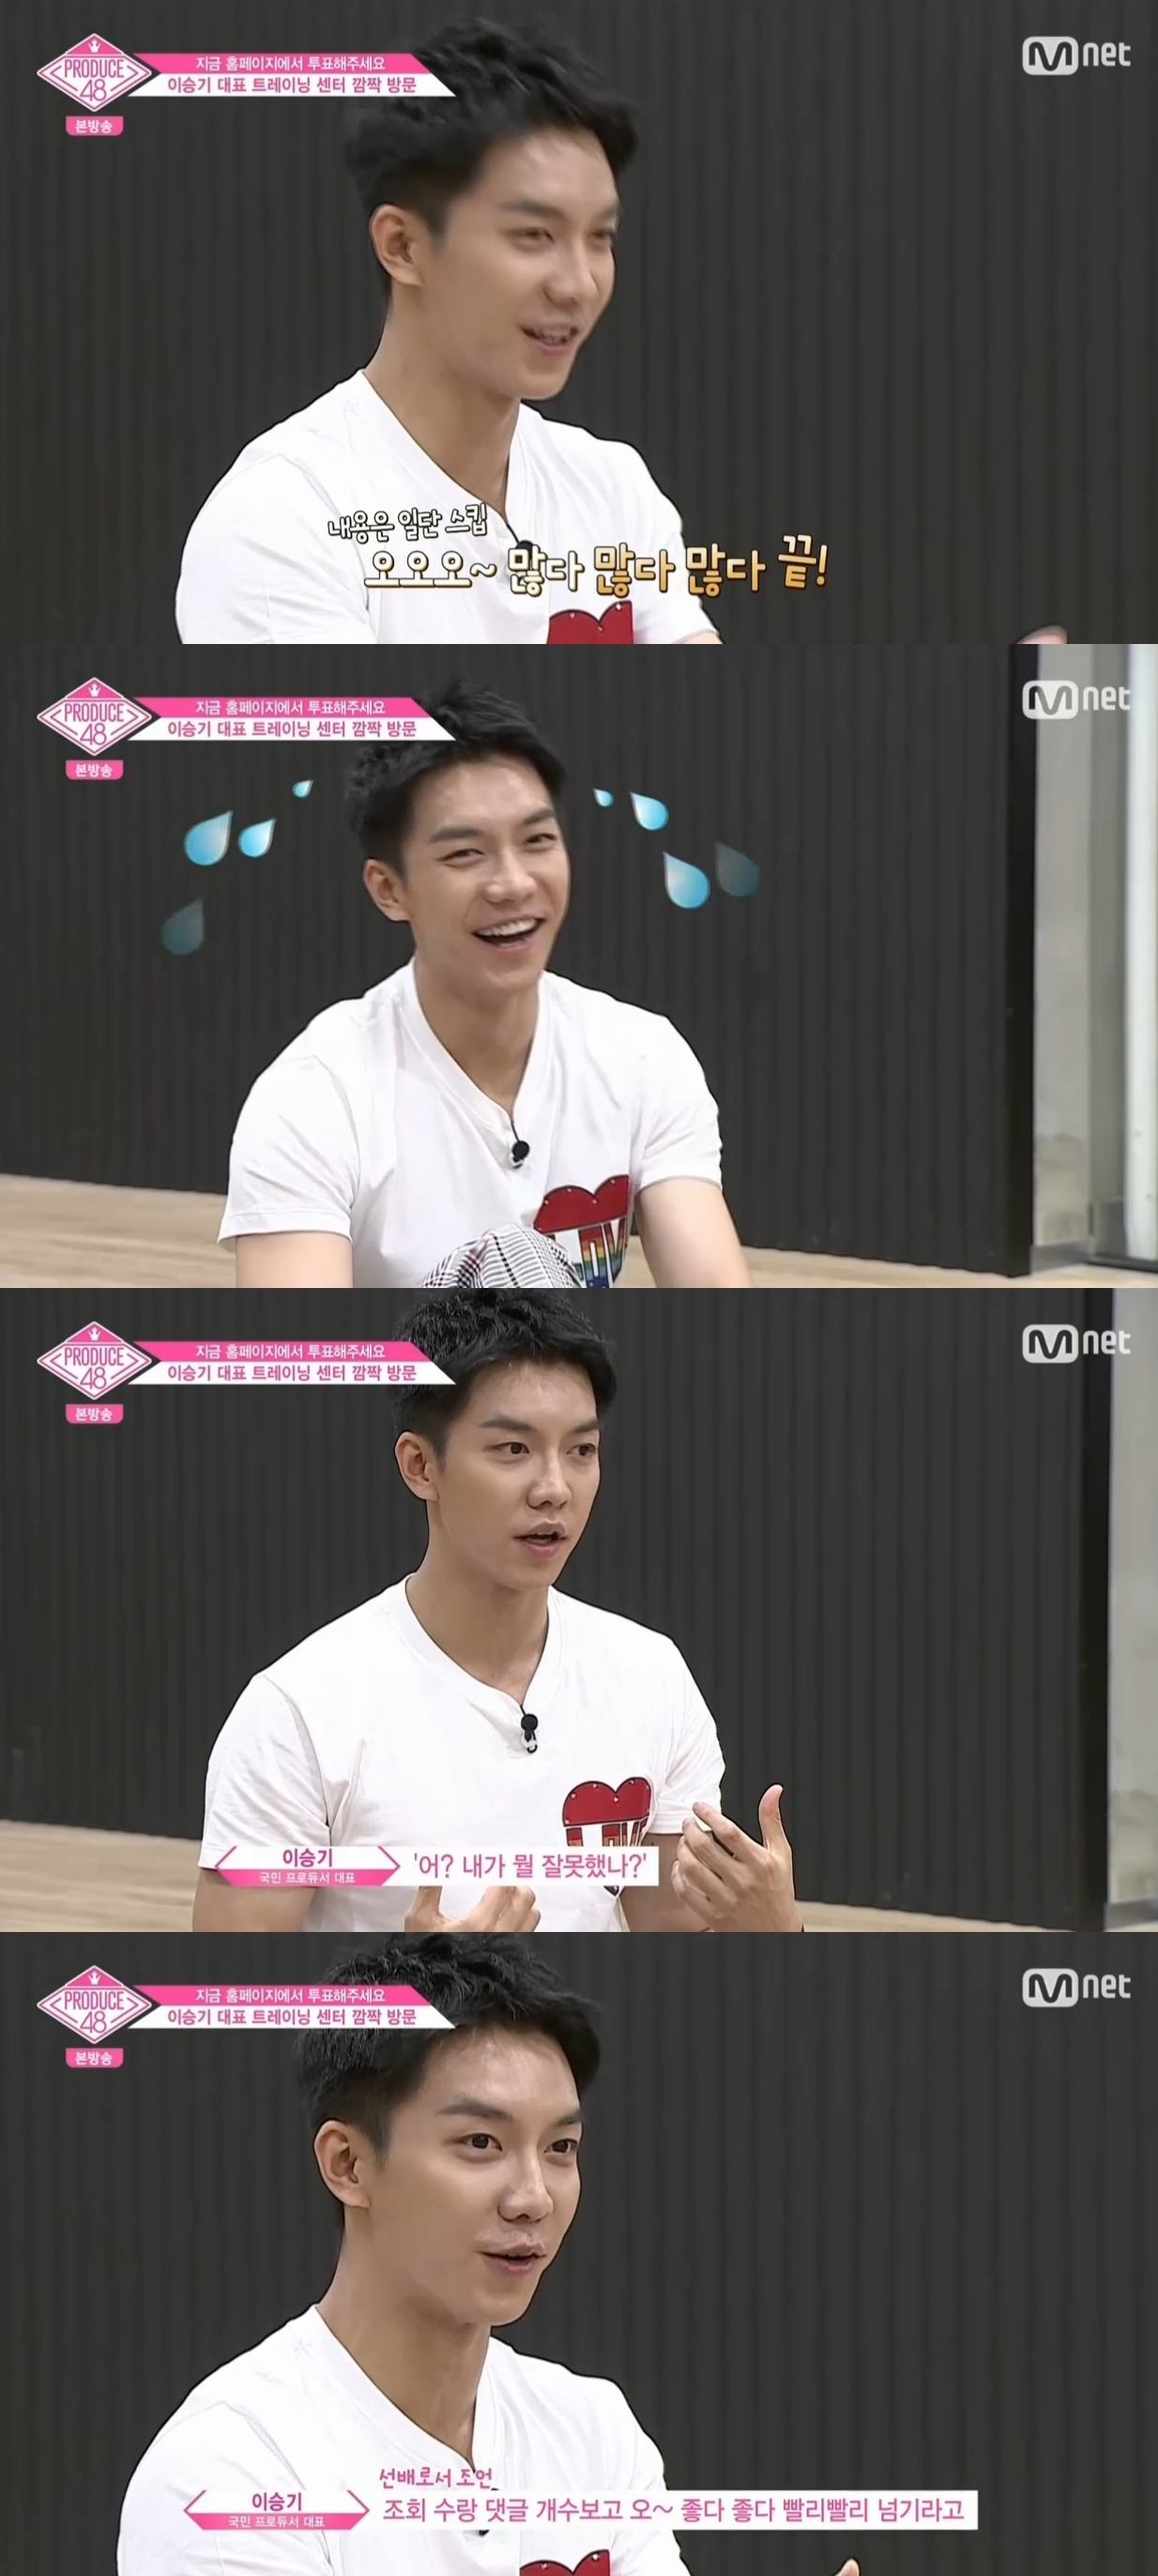 Seoul = = Lee Seung-gi sent a message of support to Idol Producer.Mnet Produced 48, which was broadcasted at 11 pm on the 10th, depicted Idol Producer who met Lee Seung-gi.Lee Seung-gi met with 30 Idol Producer and talked about it. I came to see what I could do to help, he said.The rankings are down, the songs are moving, so Im just stuck with what to do, Goto Moe said.Lee Seung-gi said, It will look beautiful to the viewer to see the best of the last time. If you endure this time well, you will be harder inside without knowing yourself.Lee Seung-gi said, When I think that I have fallen, I can not see the advantages of my original self when I think about what I have done wrong. It is important to concentrate on my role on stage without thinking about the rank as much as I go on stage.Come on, he cheered.I think we should consider our own colors a little bit more, he added. Lee Seung-gi added, Comment, watch the views and like it.I do not want to lose my own color by looking at it. 